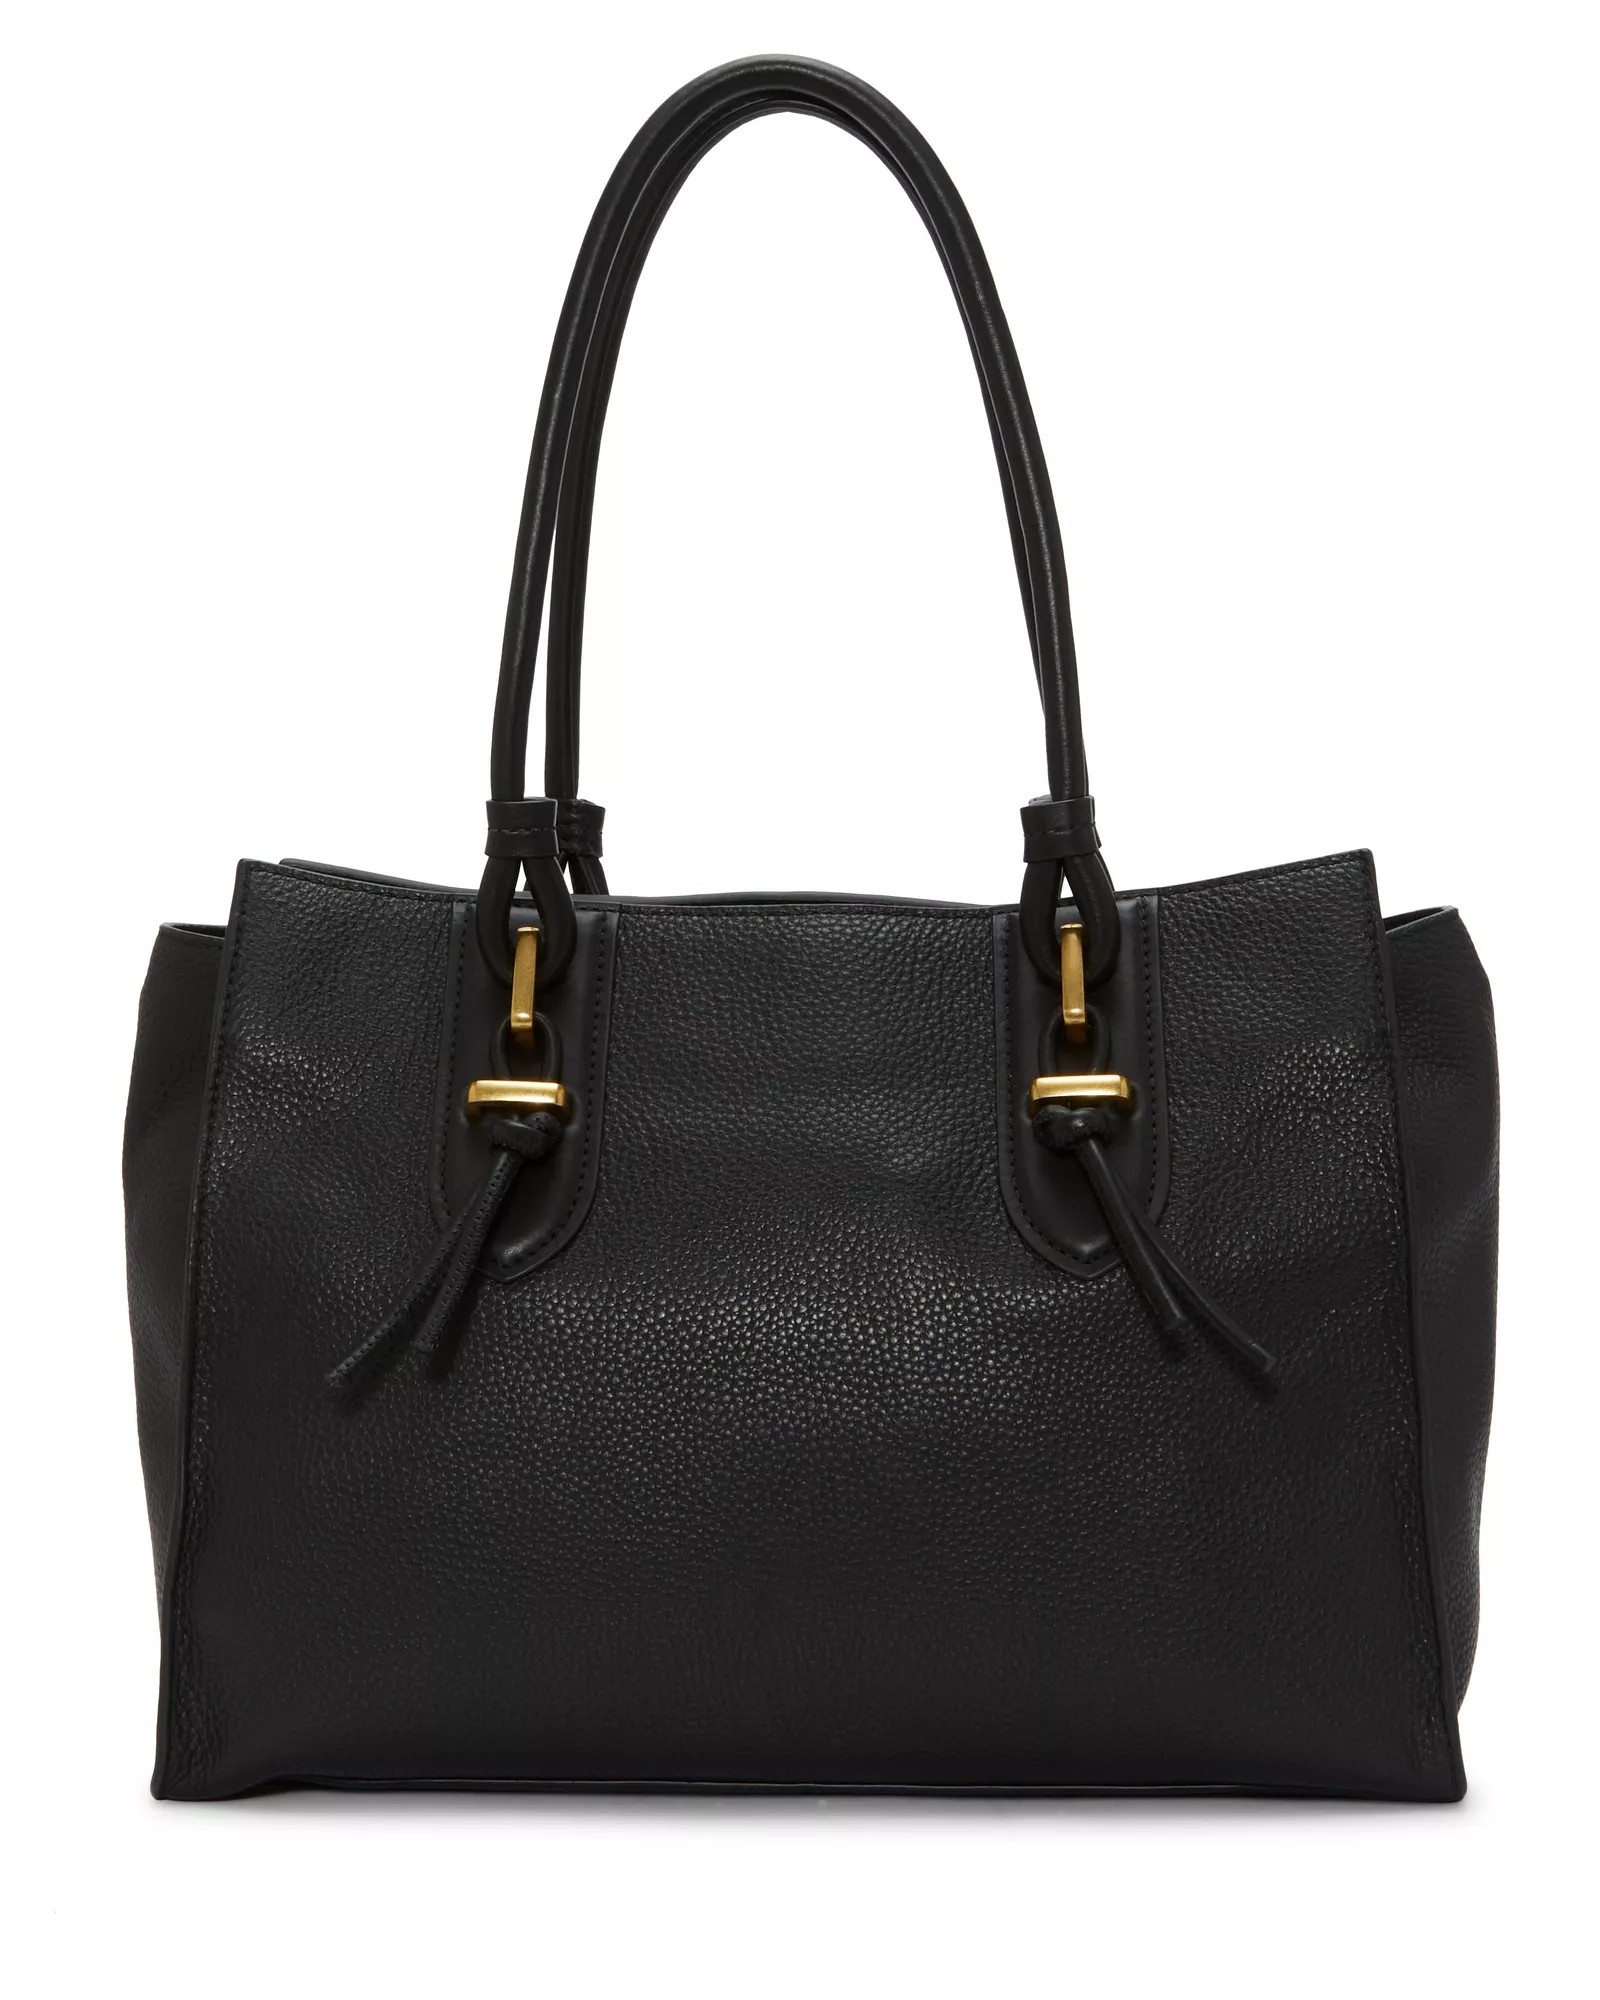 Vince Camuto Maecy Tote